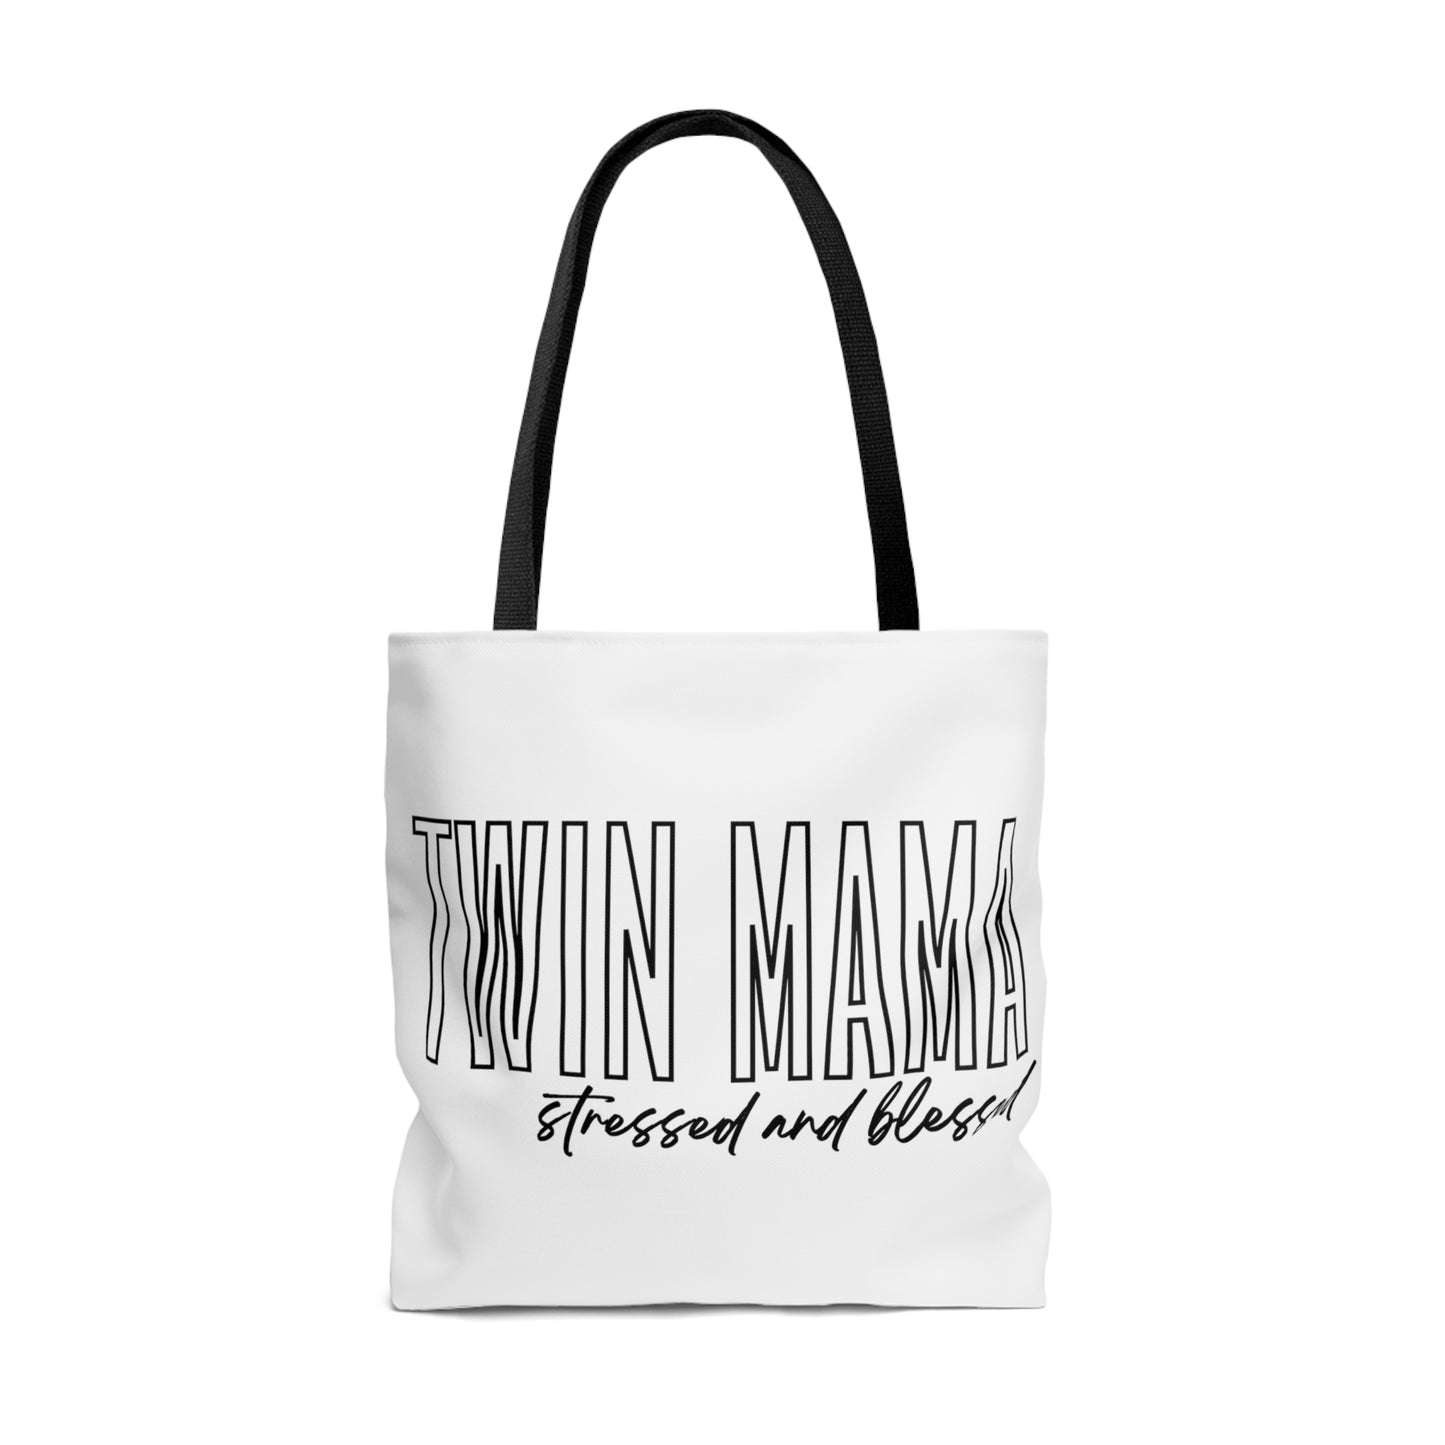 Twin Mama Stressed and Blessed Large Tote Bag